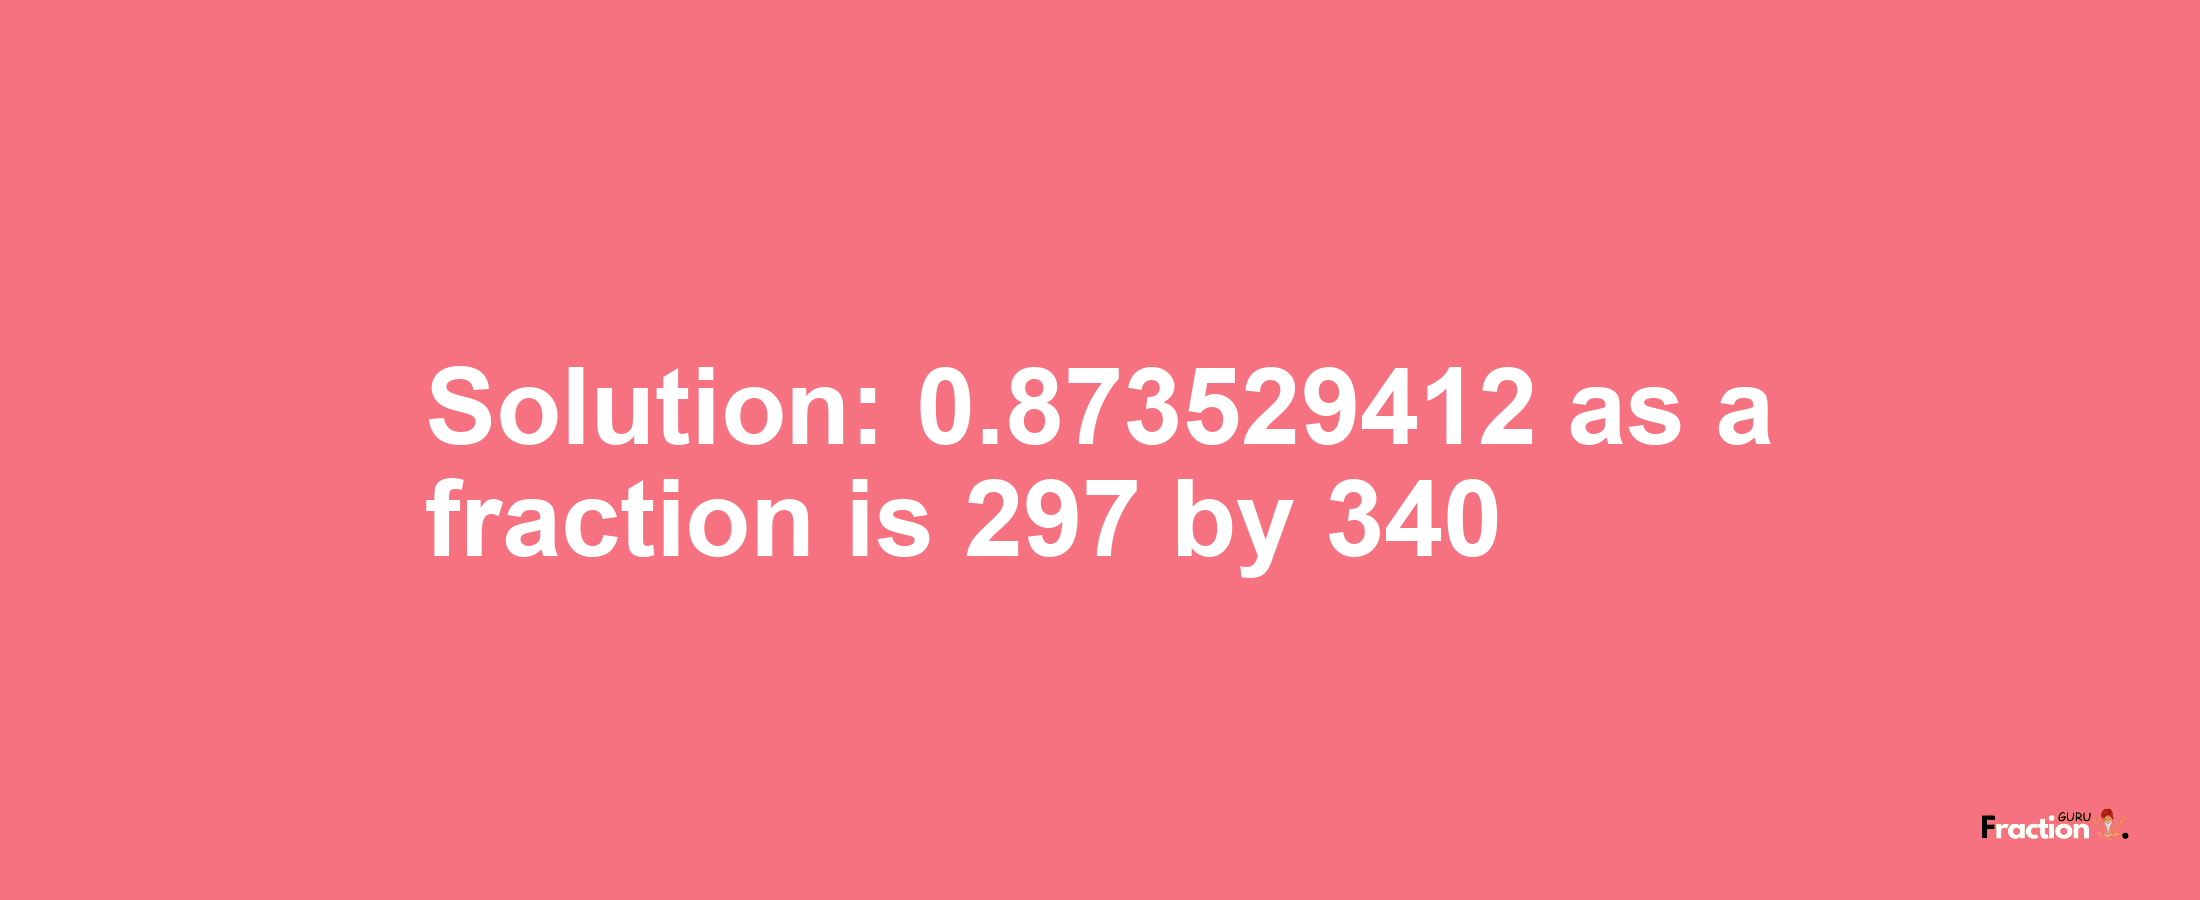 Solution:0.873529412 as a fraction is 297/340